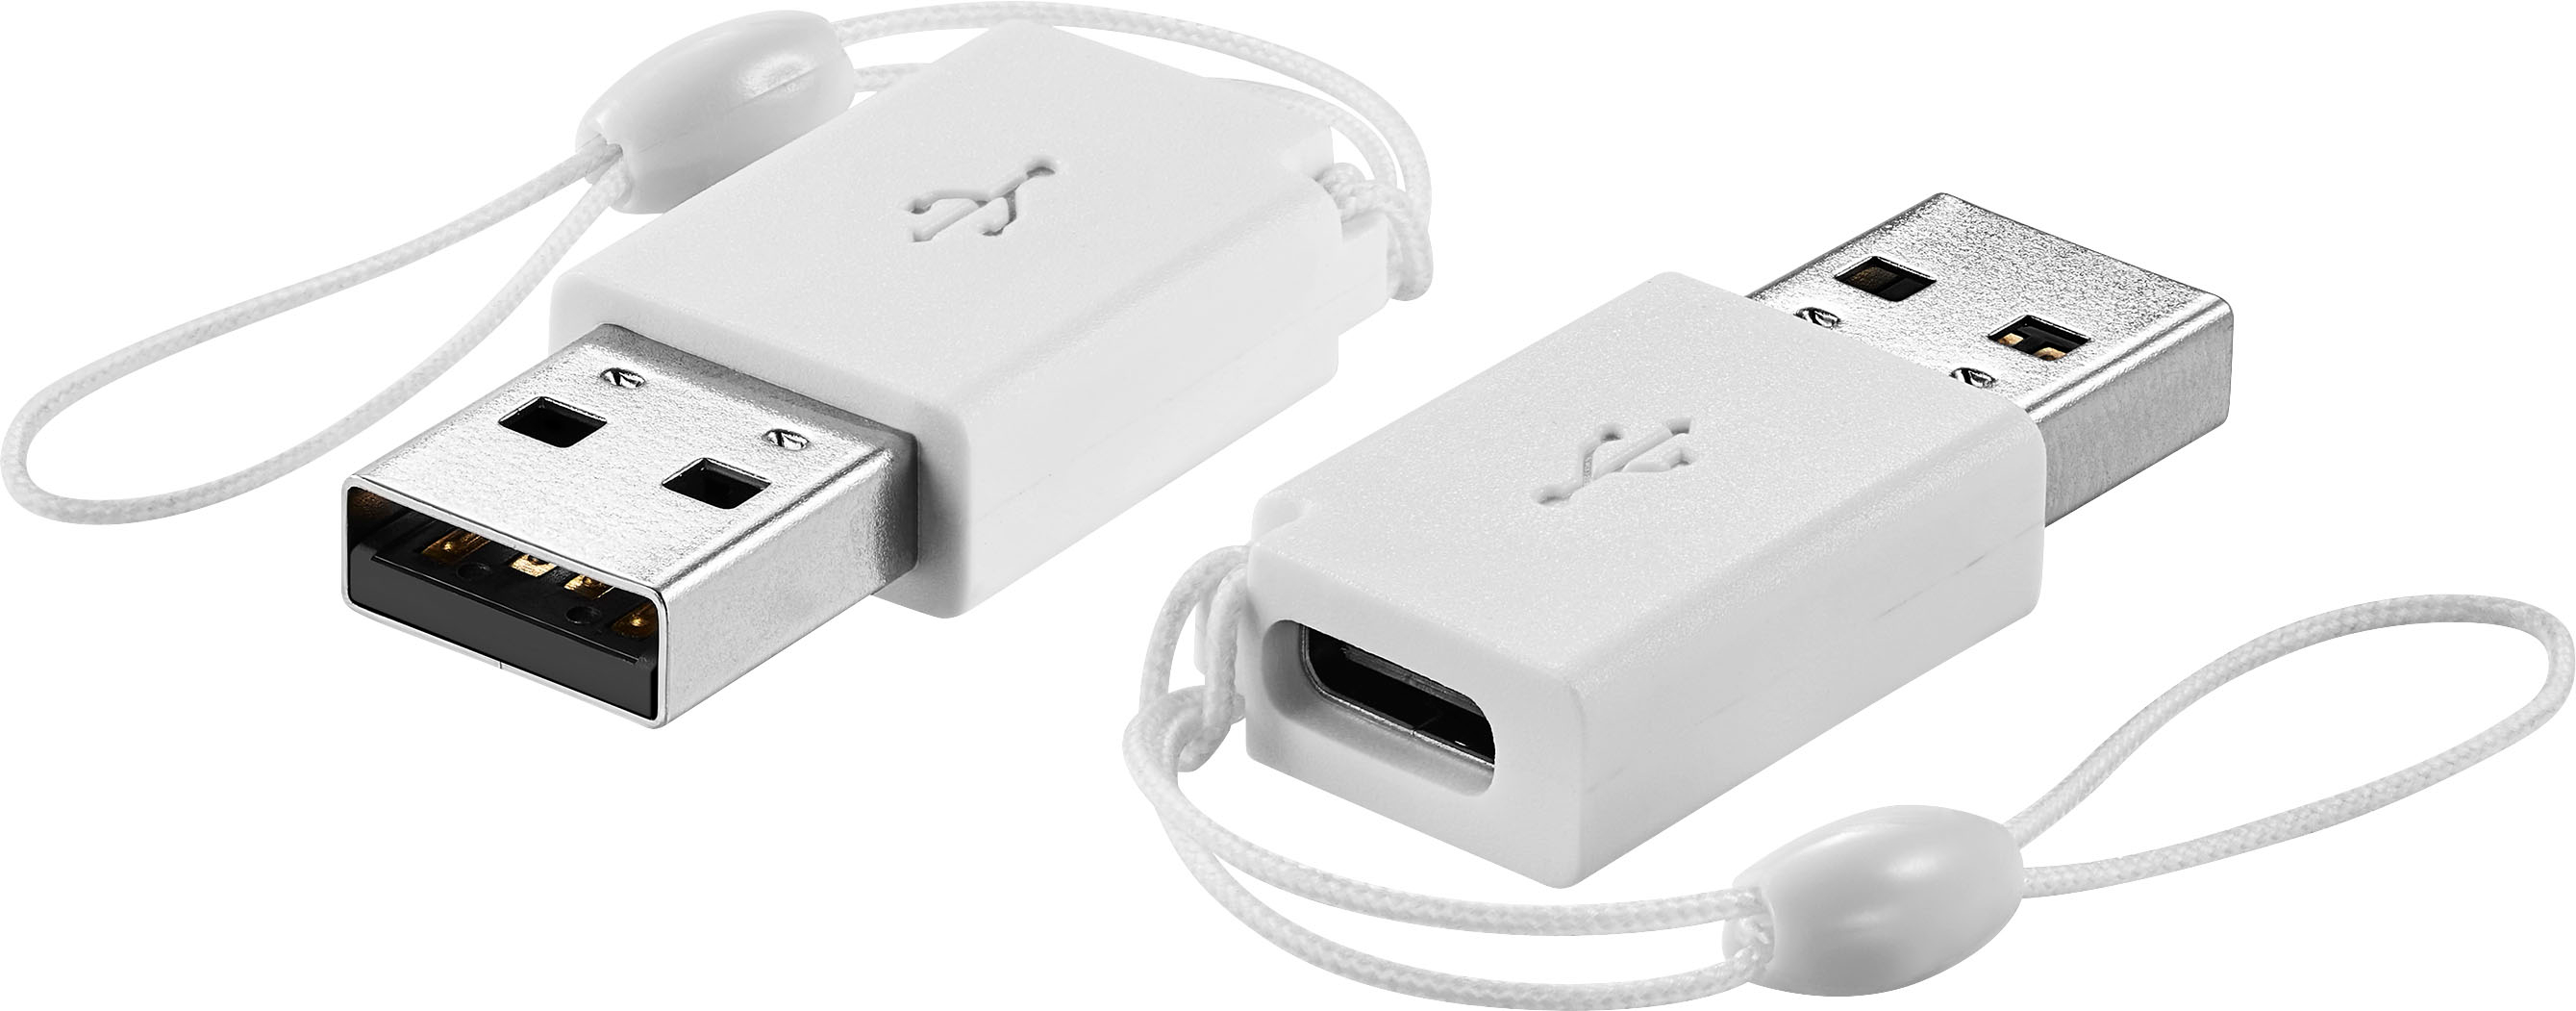 Retail Box Packing White Dual Port USB Wall Charger Adapter, For